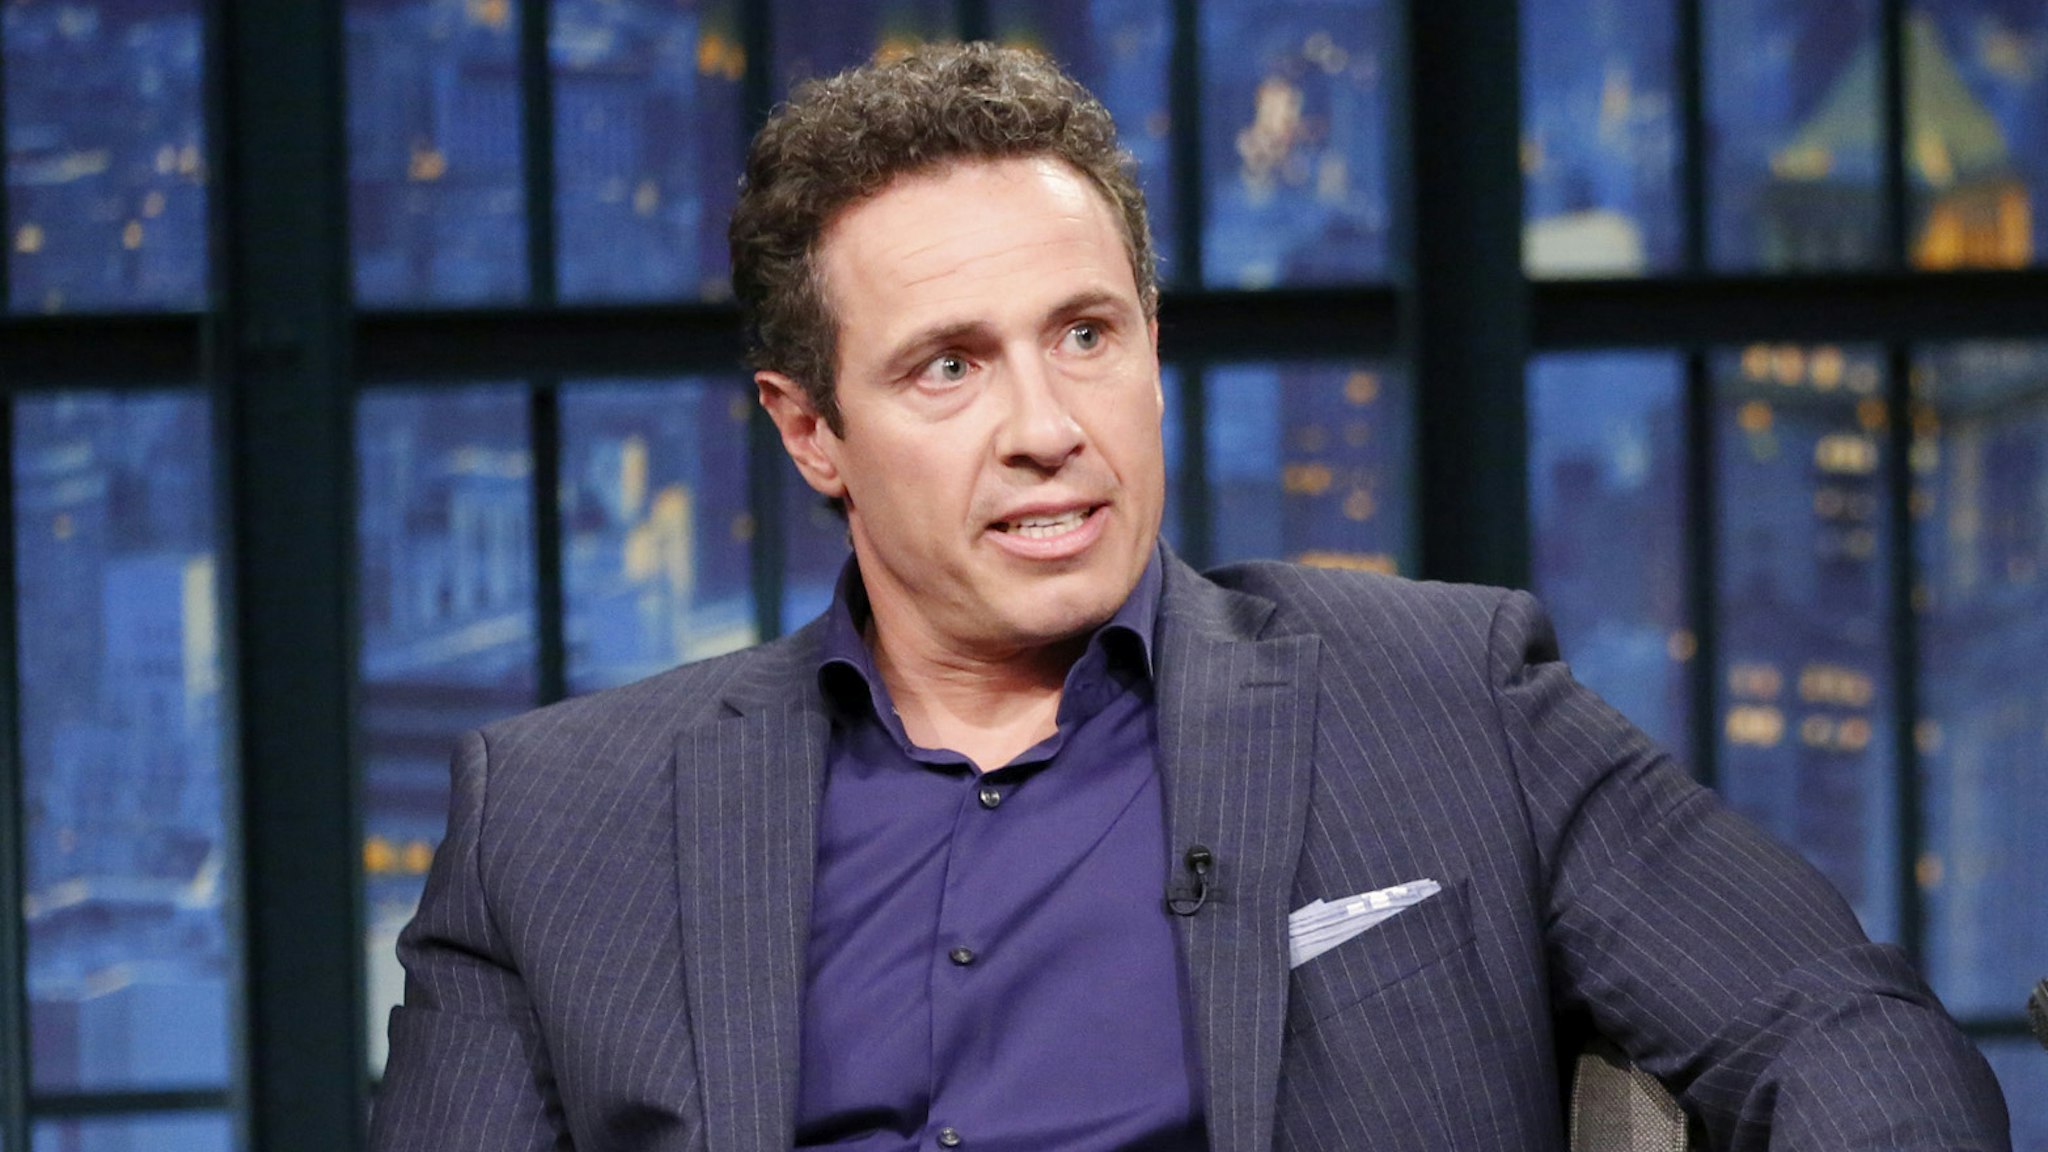 LATE NIGHT WITH SETH MEYERS -- Episode 340 -- Pictured: (l-r) Journalist Chris Cuomo during an interview with host Seth Meyers on March 15, 2016